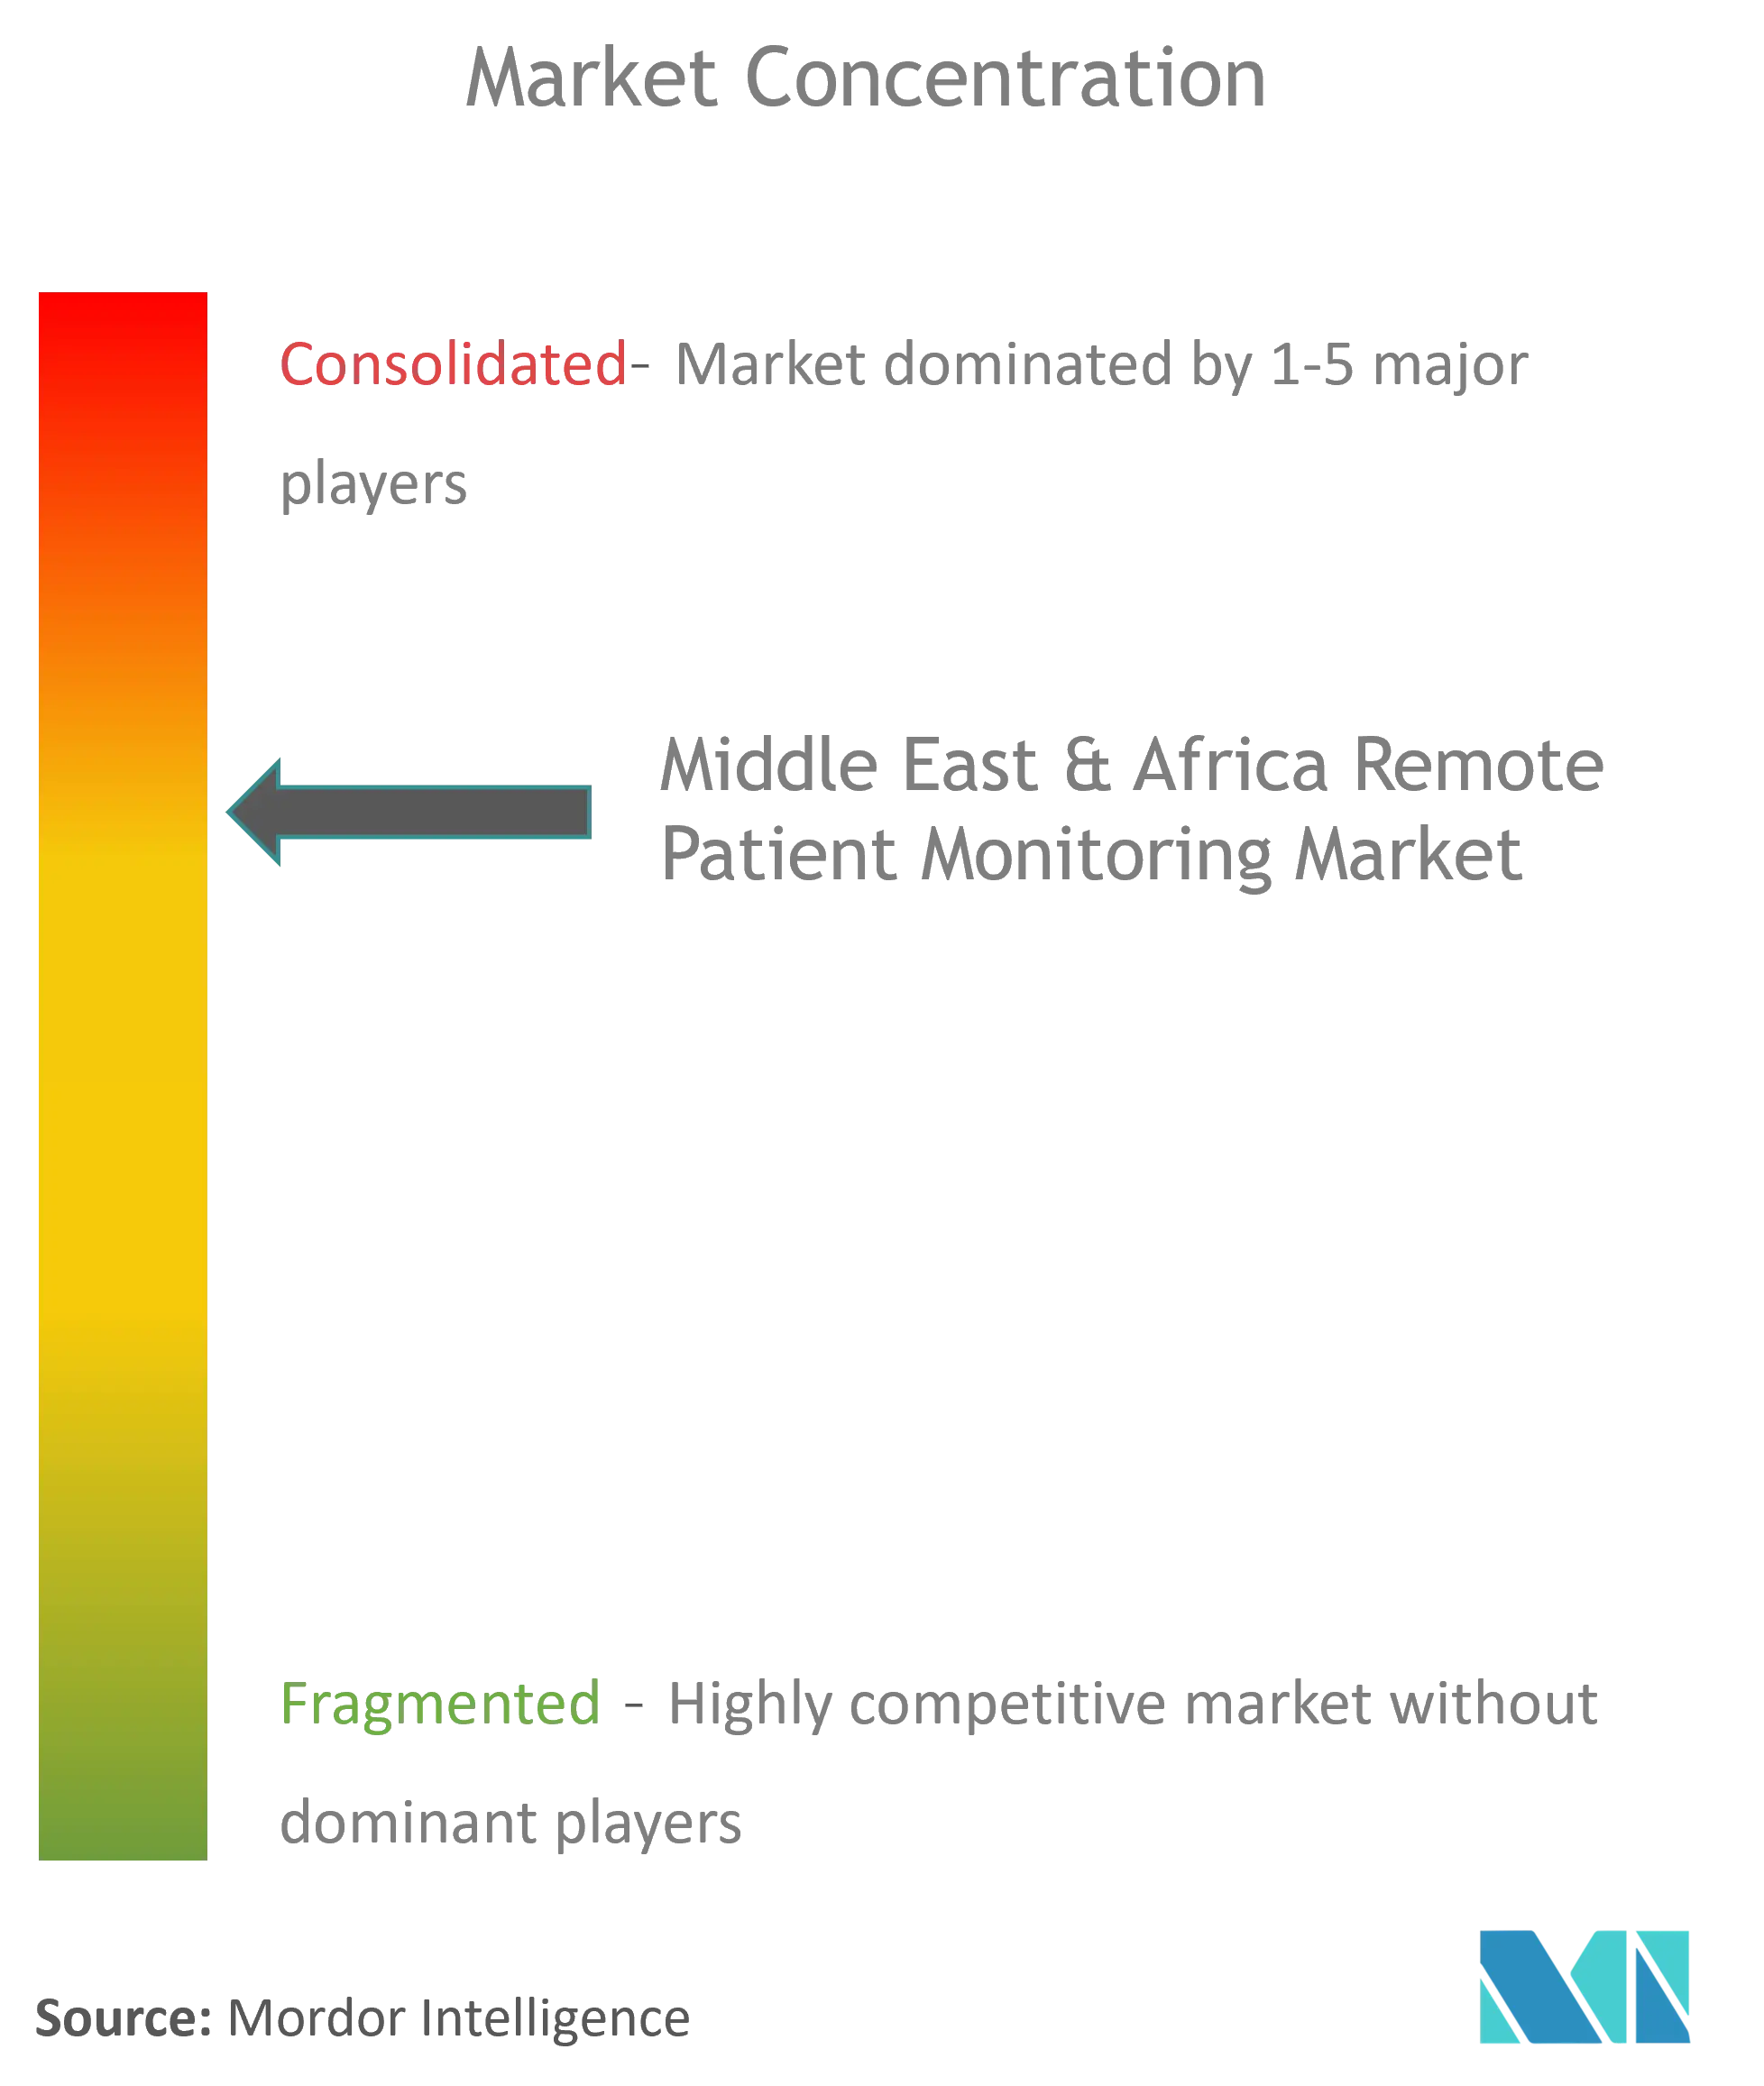 Middle East & Africa Remote Patient Monitoring Market Concentration